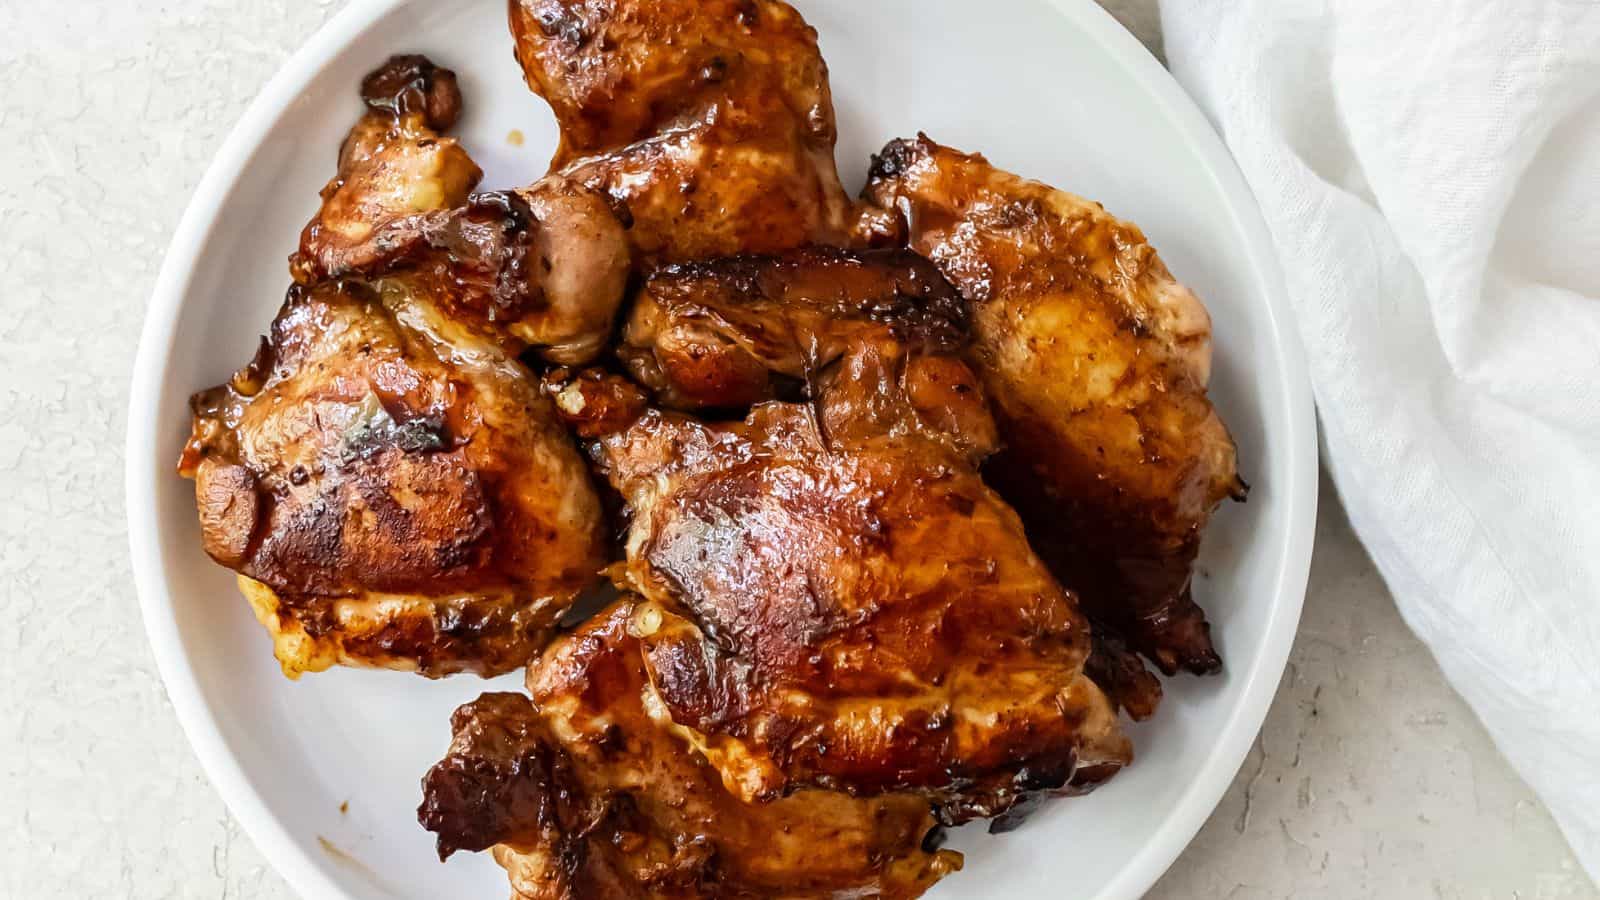 <p>Prepare for juicy perfection with Teriyaki Chicken Thighs on the Blackstone Griddle! With just 2 ingredients, this grilled teriyaki chicken cooks in under 20 minutes—ideal for meal prep enthusiasts!<br><strong>Get the Recipe: </strong><a href="https://laraclevenger.com/teriyaki-chicken-thighs-on-blackstone/?utm_source=msn&utm_medium=page&utm_campaign=msn">Teriyaki Chicken on the Blackstone Griddle</a></p>